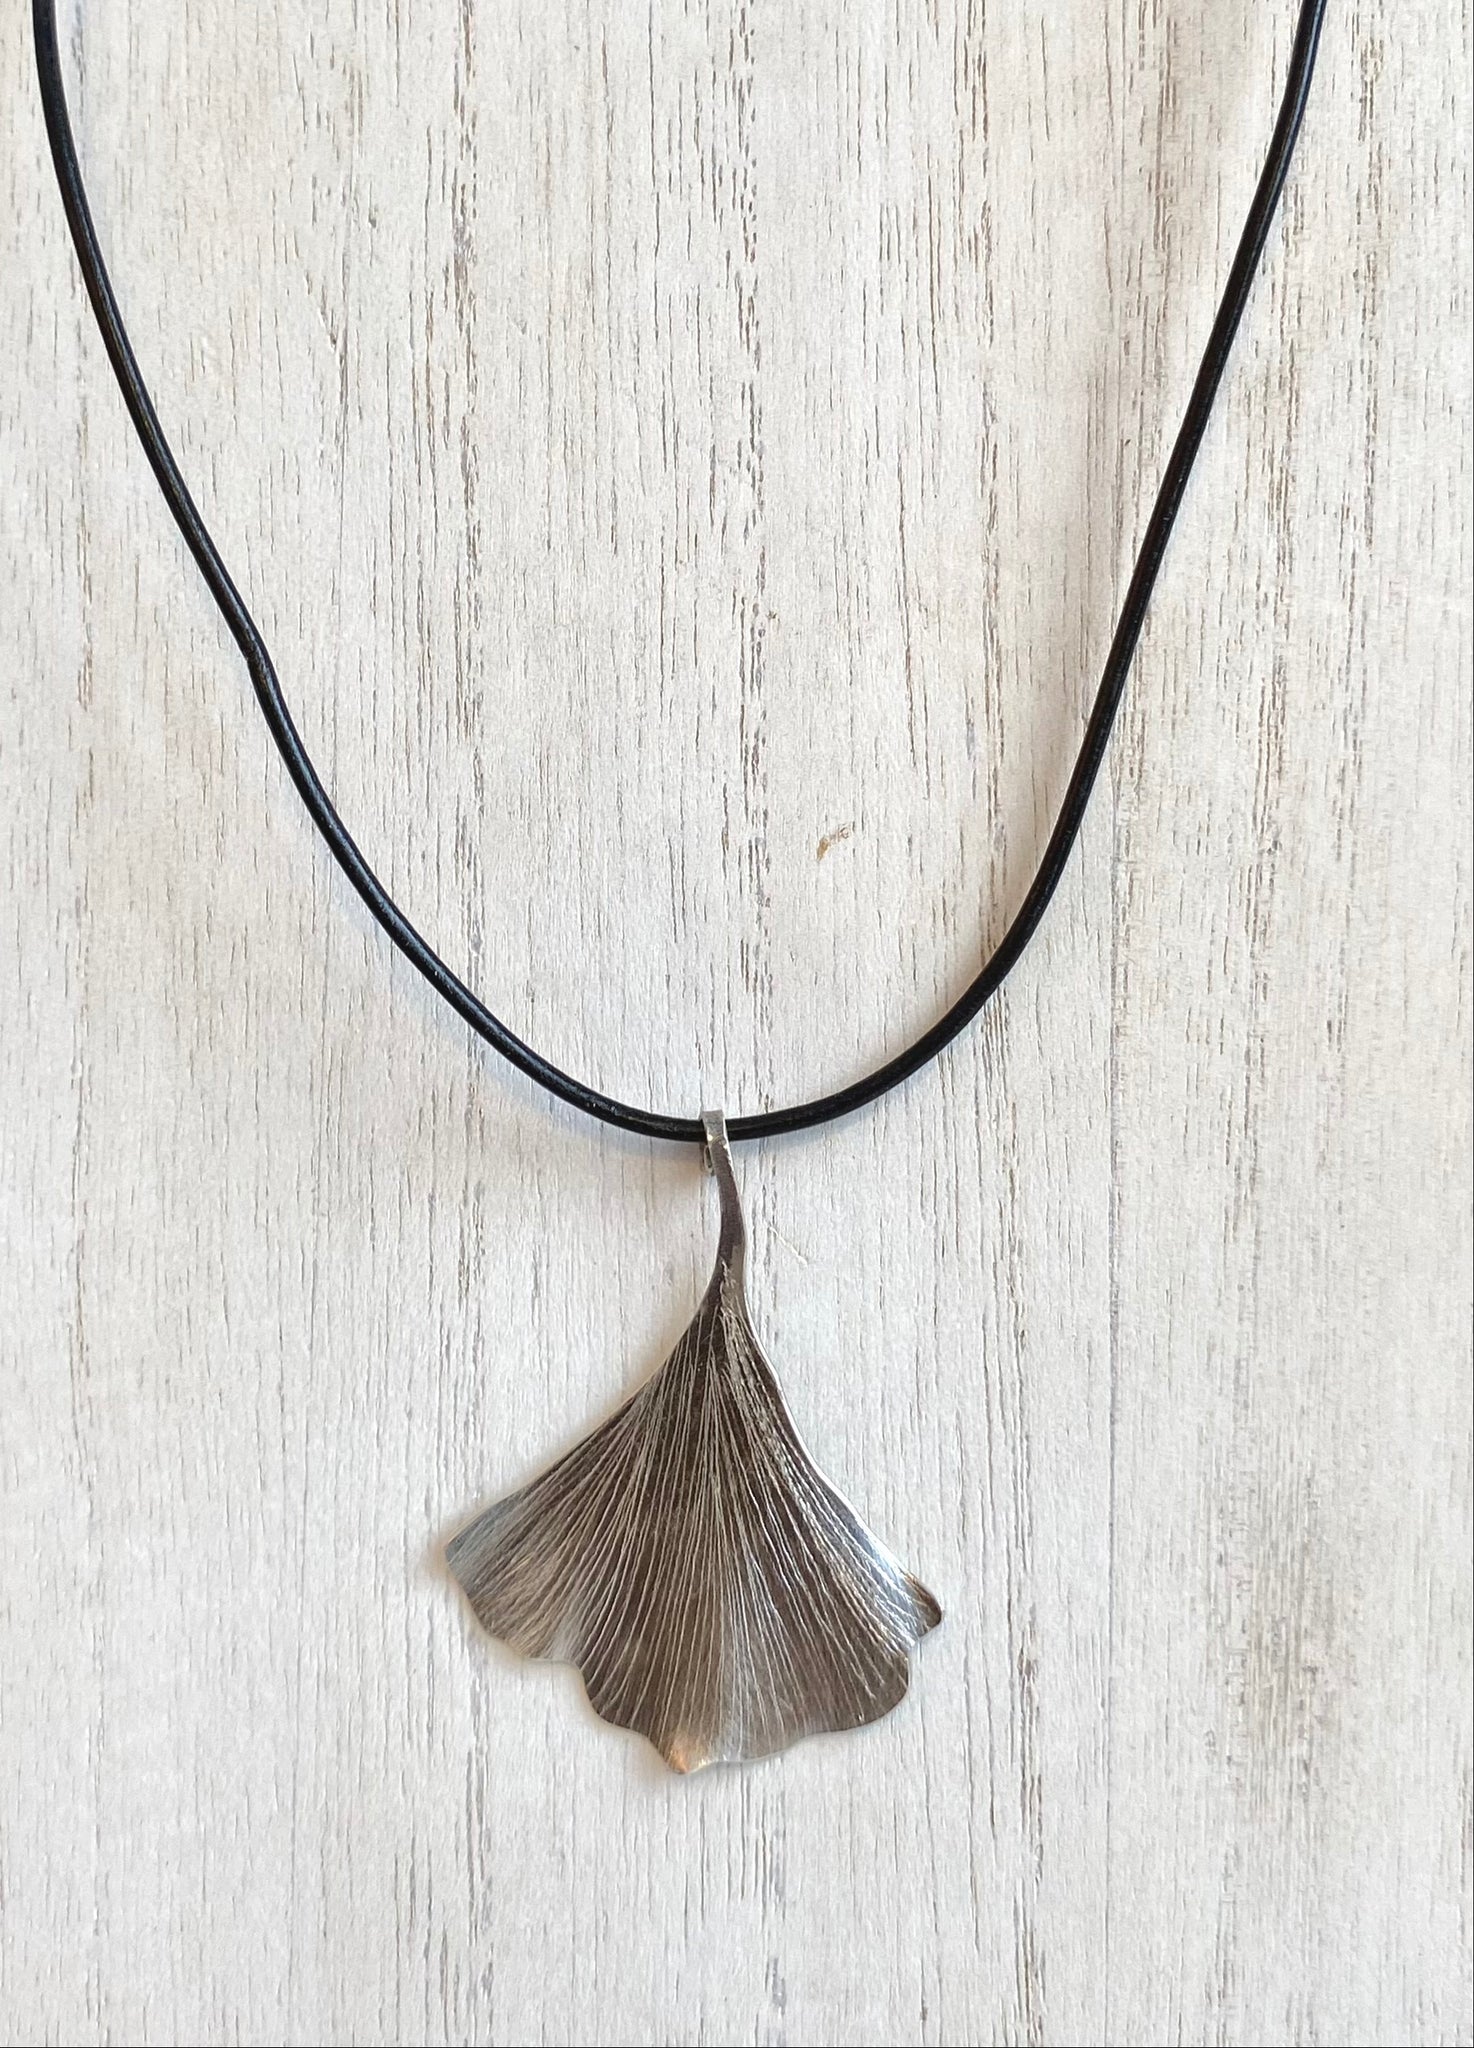 Buy Sterling Silver Ginkgo Leaf Necklace Living Fossil Charm Small Tiny  Petite Realistic Simple Nature Pendant Biloba Forest Tree Jewelry 5/8  Online in India - Etsy